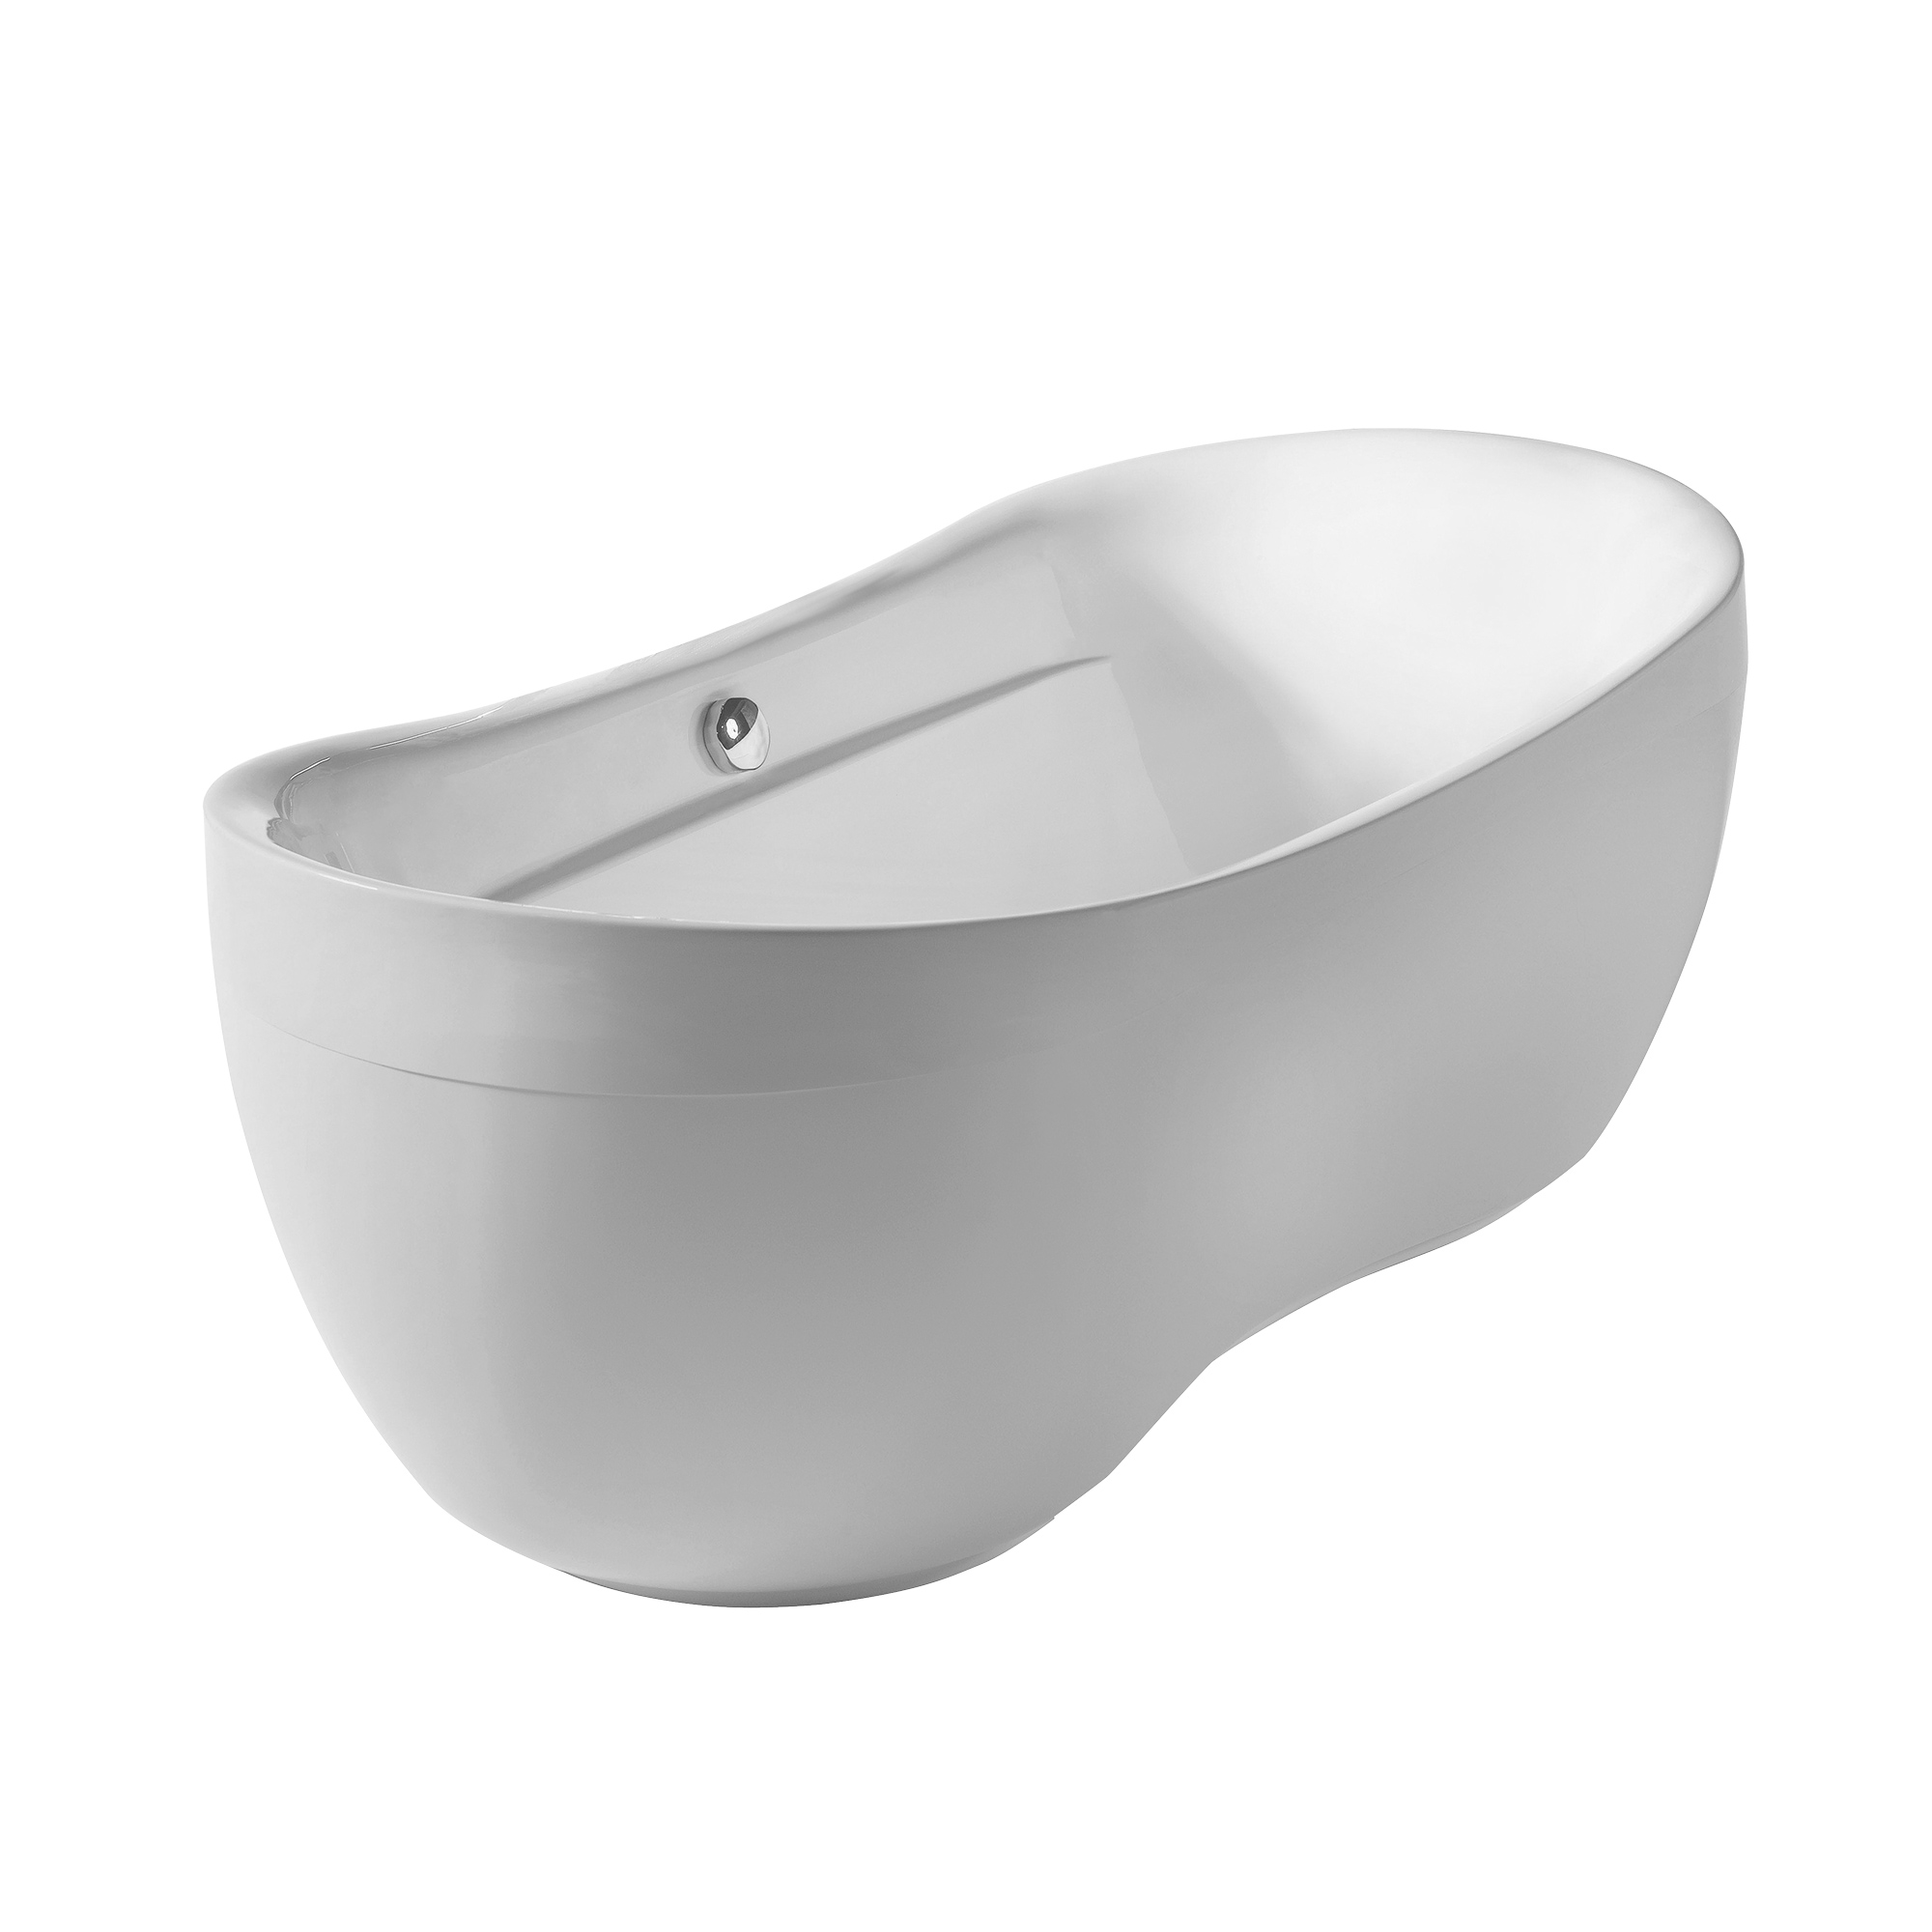 Bathhaus Oval Double Ended Lucite Acrylic Freestanding Bathtub with Curved Rim and a chrome mechanical pop-up waste and chrome c